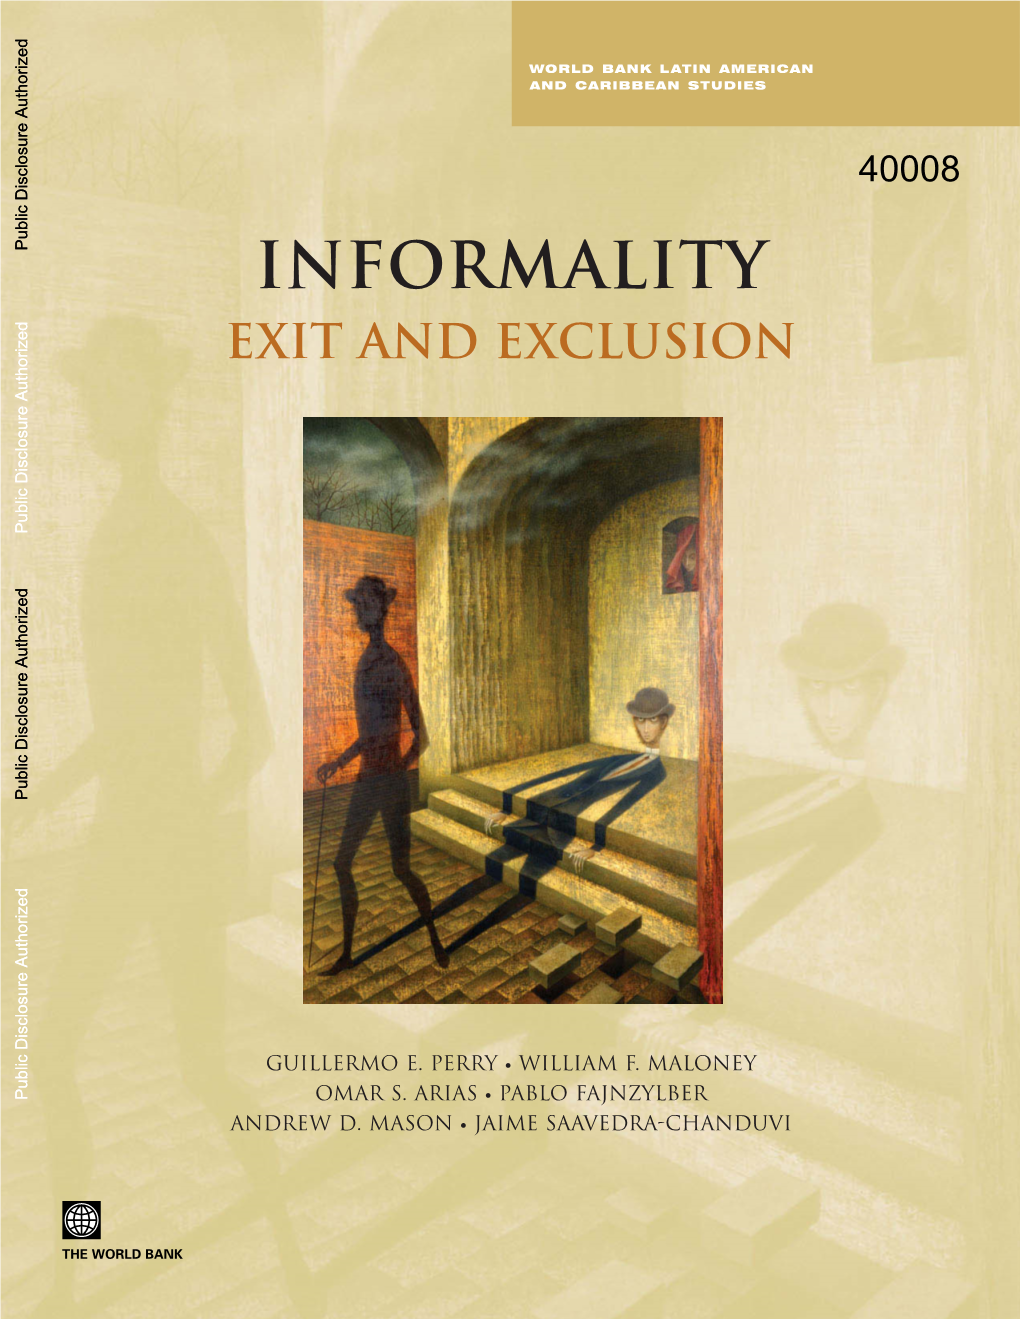 Informality – Exit and Exclusion. In